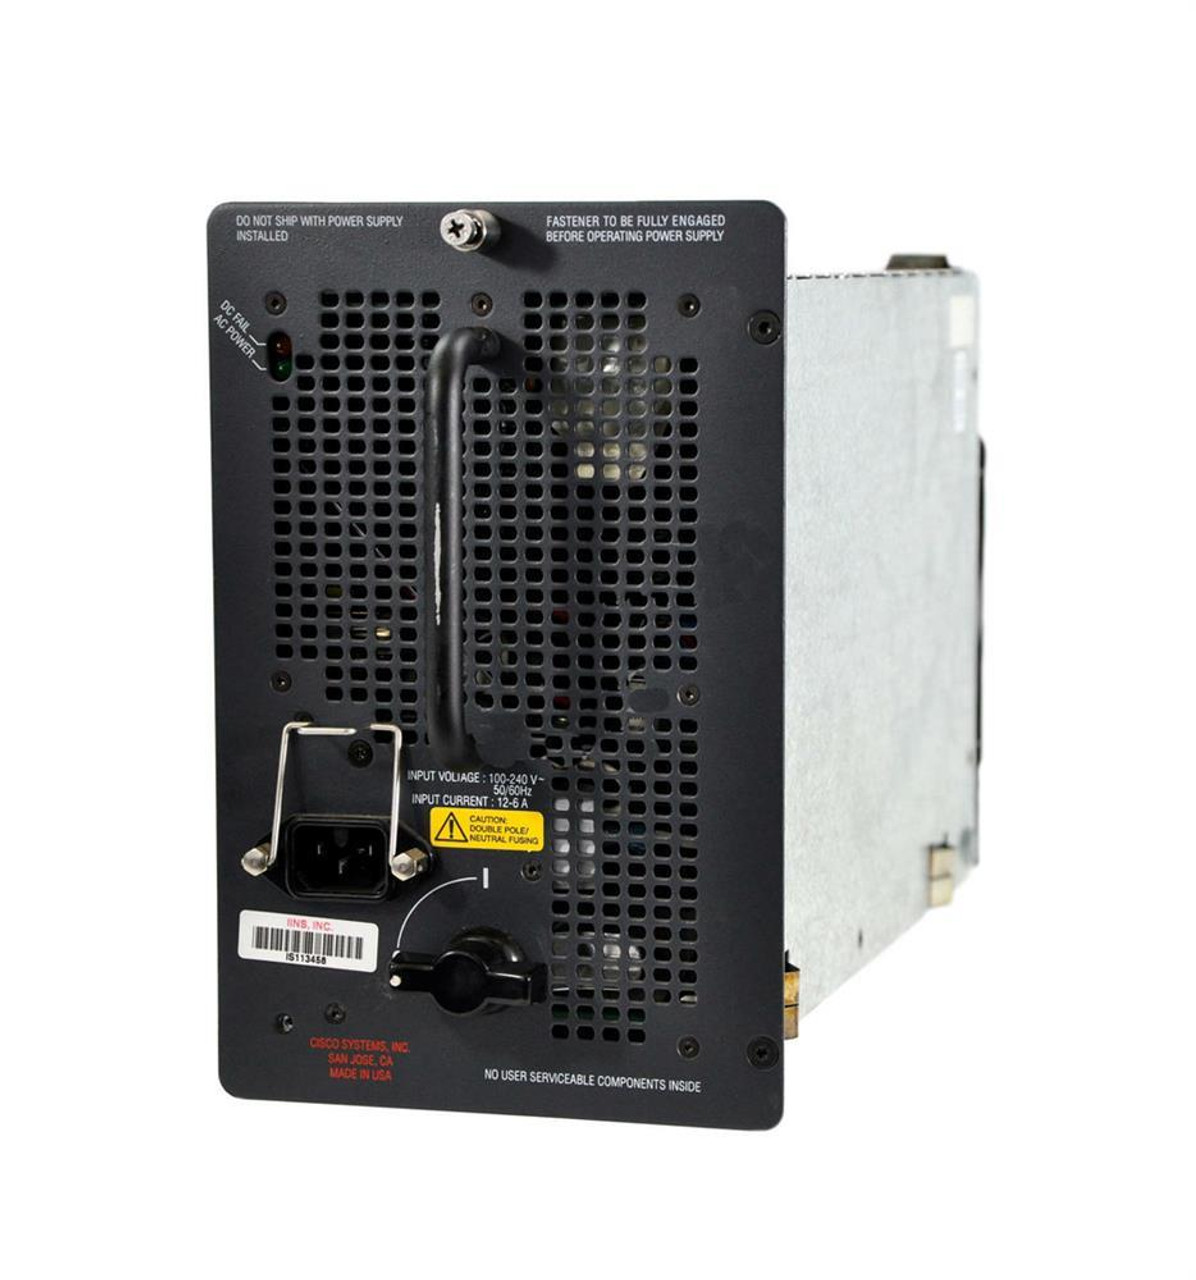 PWR-7507-AC Cisco AC Power Supply for 7507 Router (Refurbished)